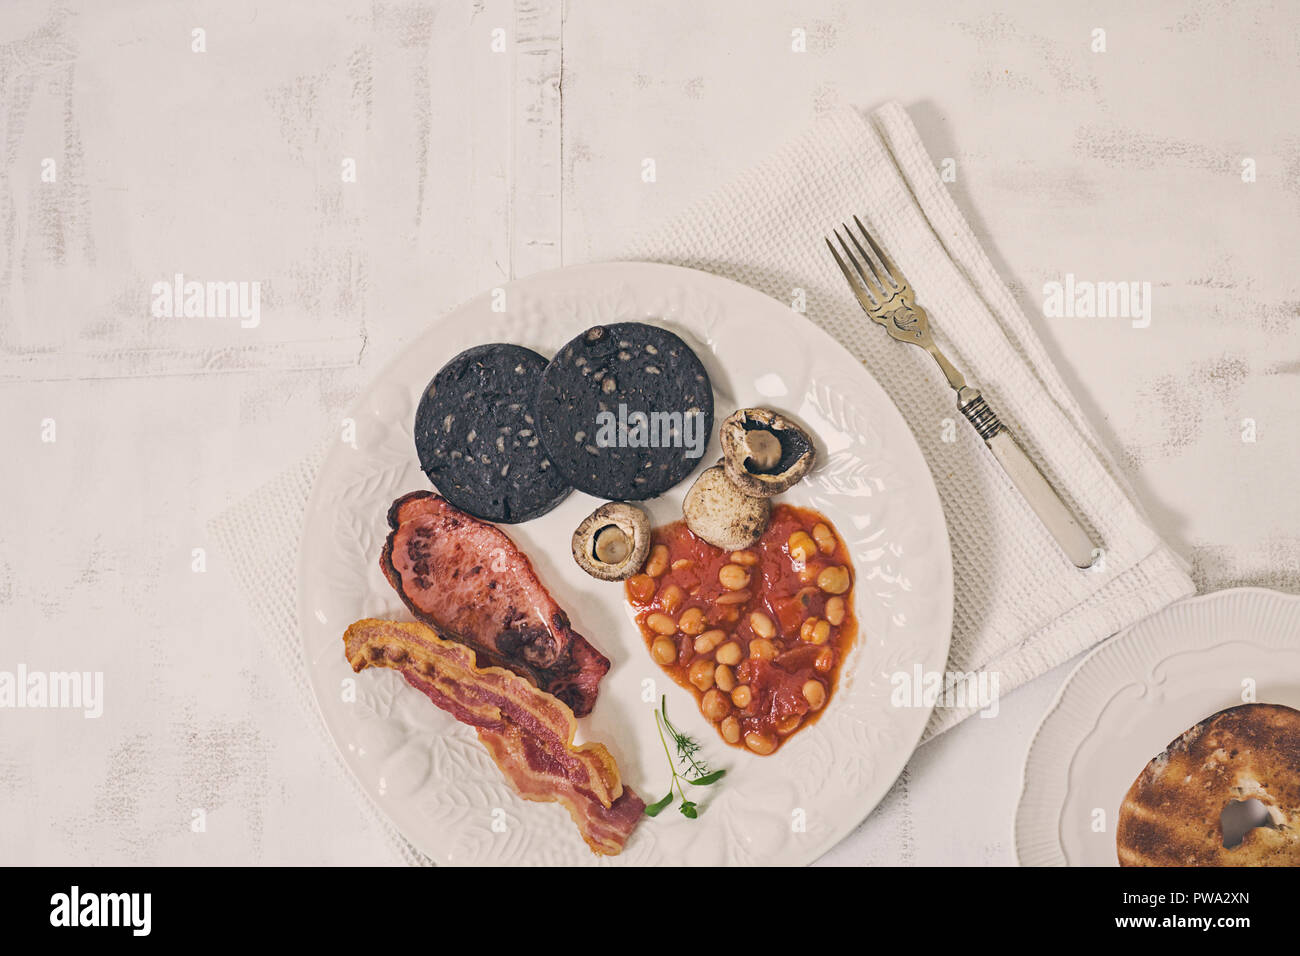 English fry up breakfast on white plate and rustic background Stock Photo